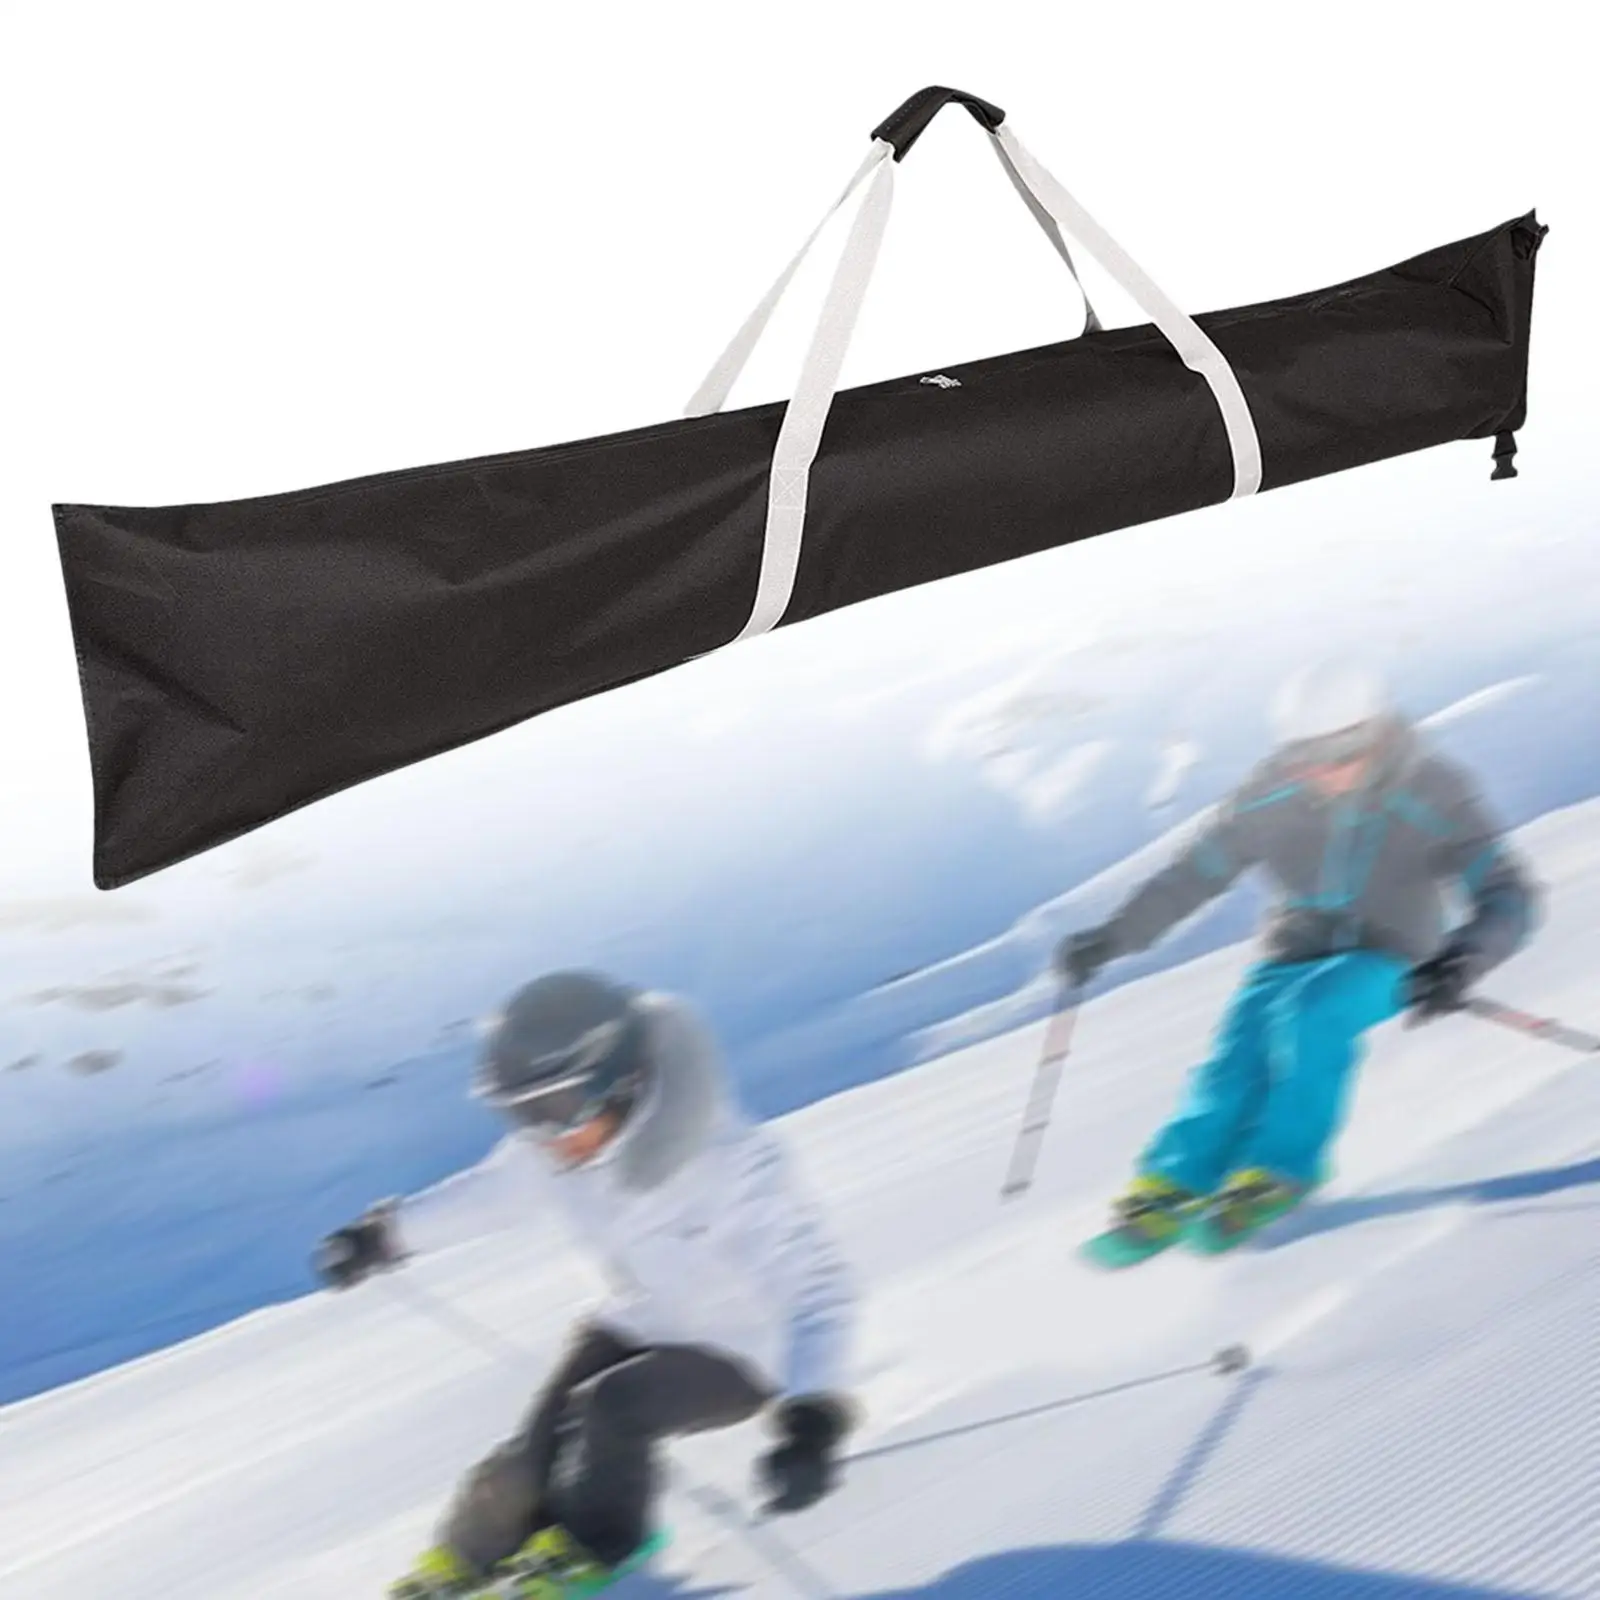 Ski Bag with Handle Snow Travel Transport Protective Adjustable Durable Ski Travel Bag for Gloves Skiing Winter Sports Outdoor